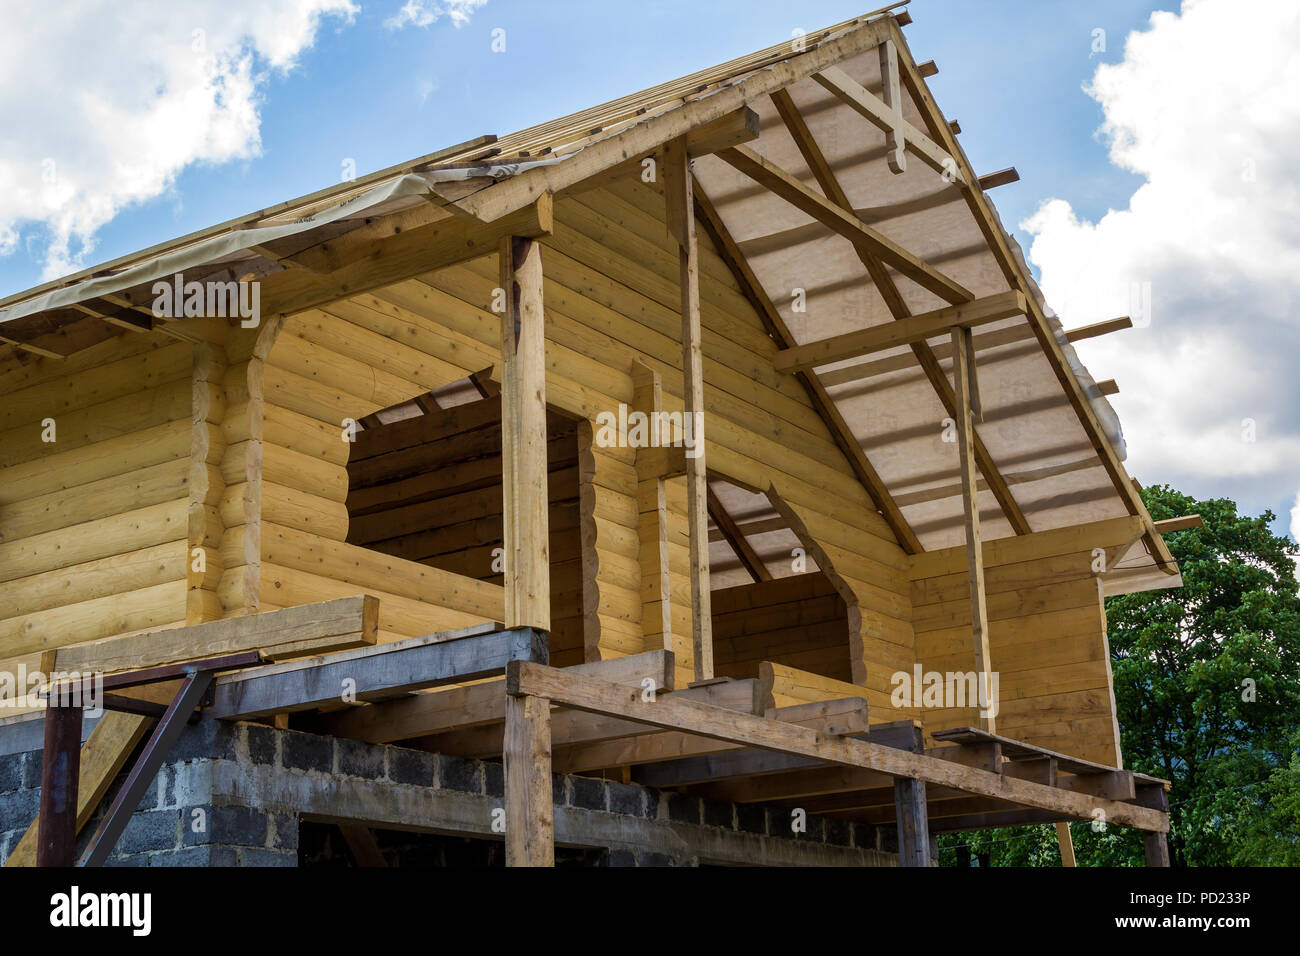 New Cottage Of Natural Lumber Materials Under Construction Wooden